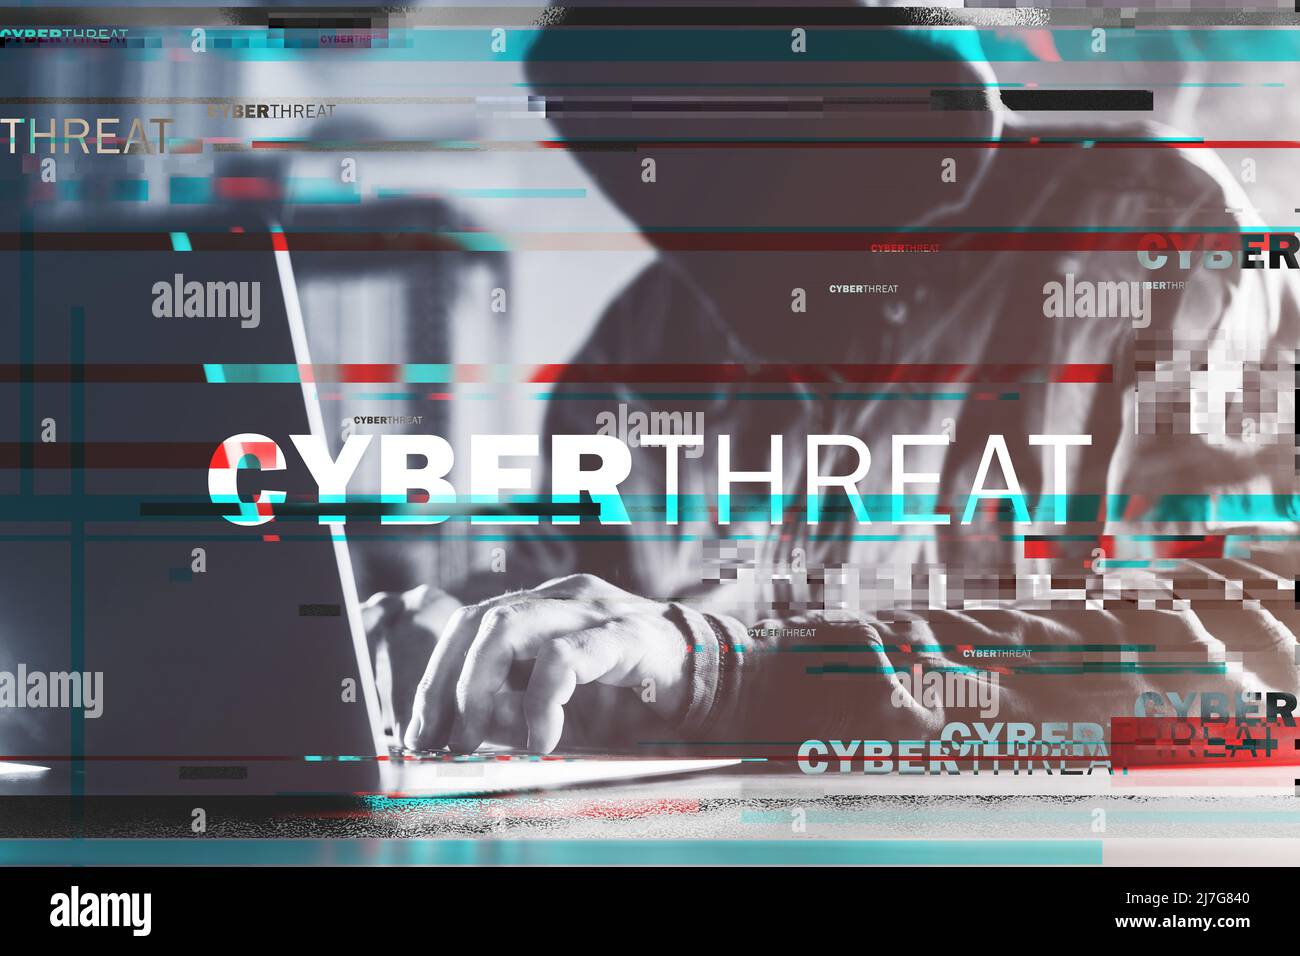 Cyberthreat, computer hacker and laptop with glitch effect, digitally altered image with selective focus Stock Photo